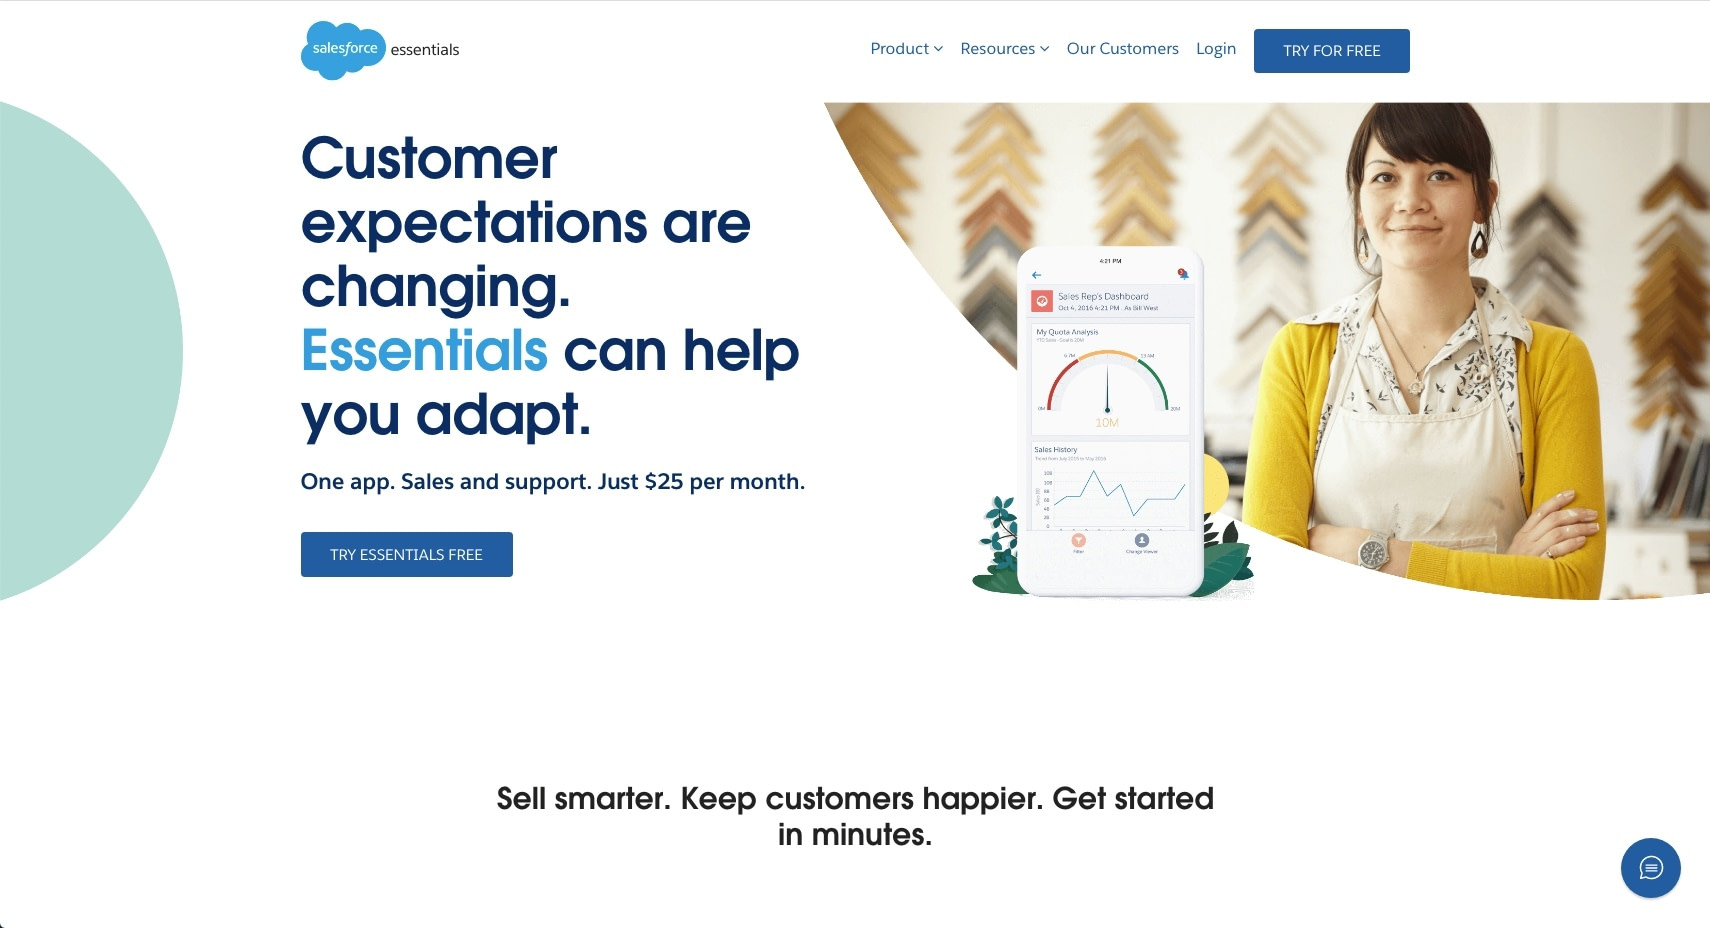 The Salesforce homepage.